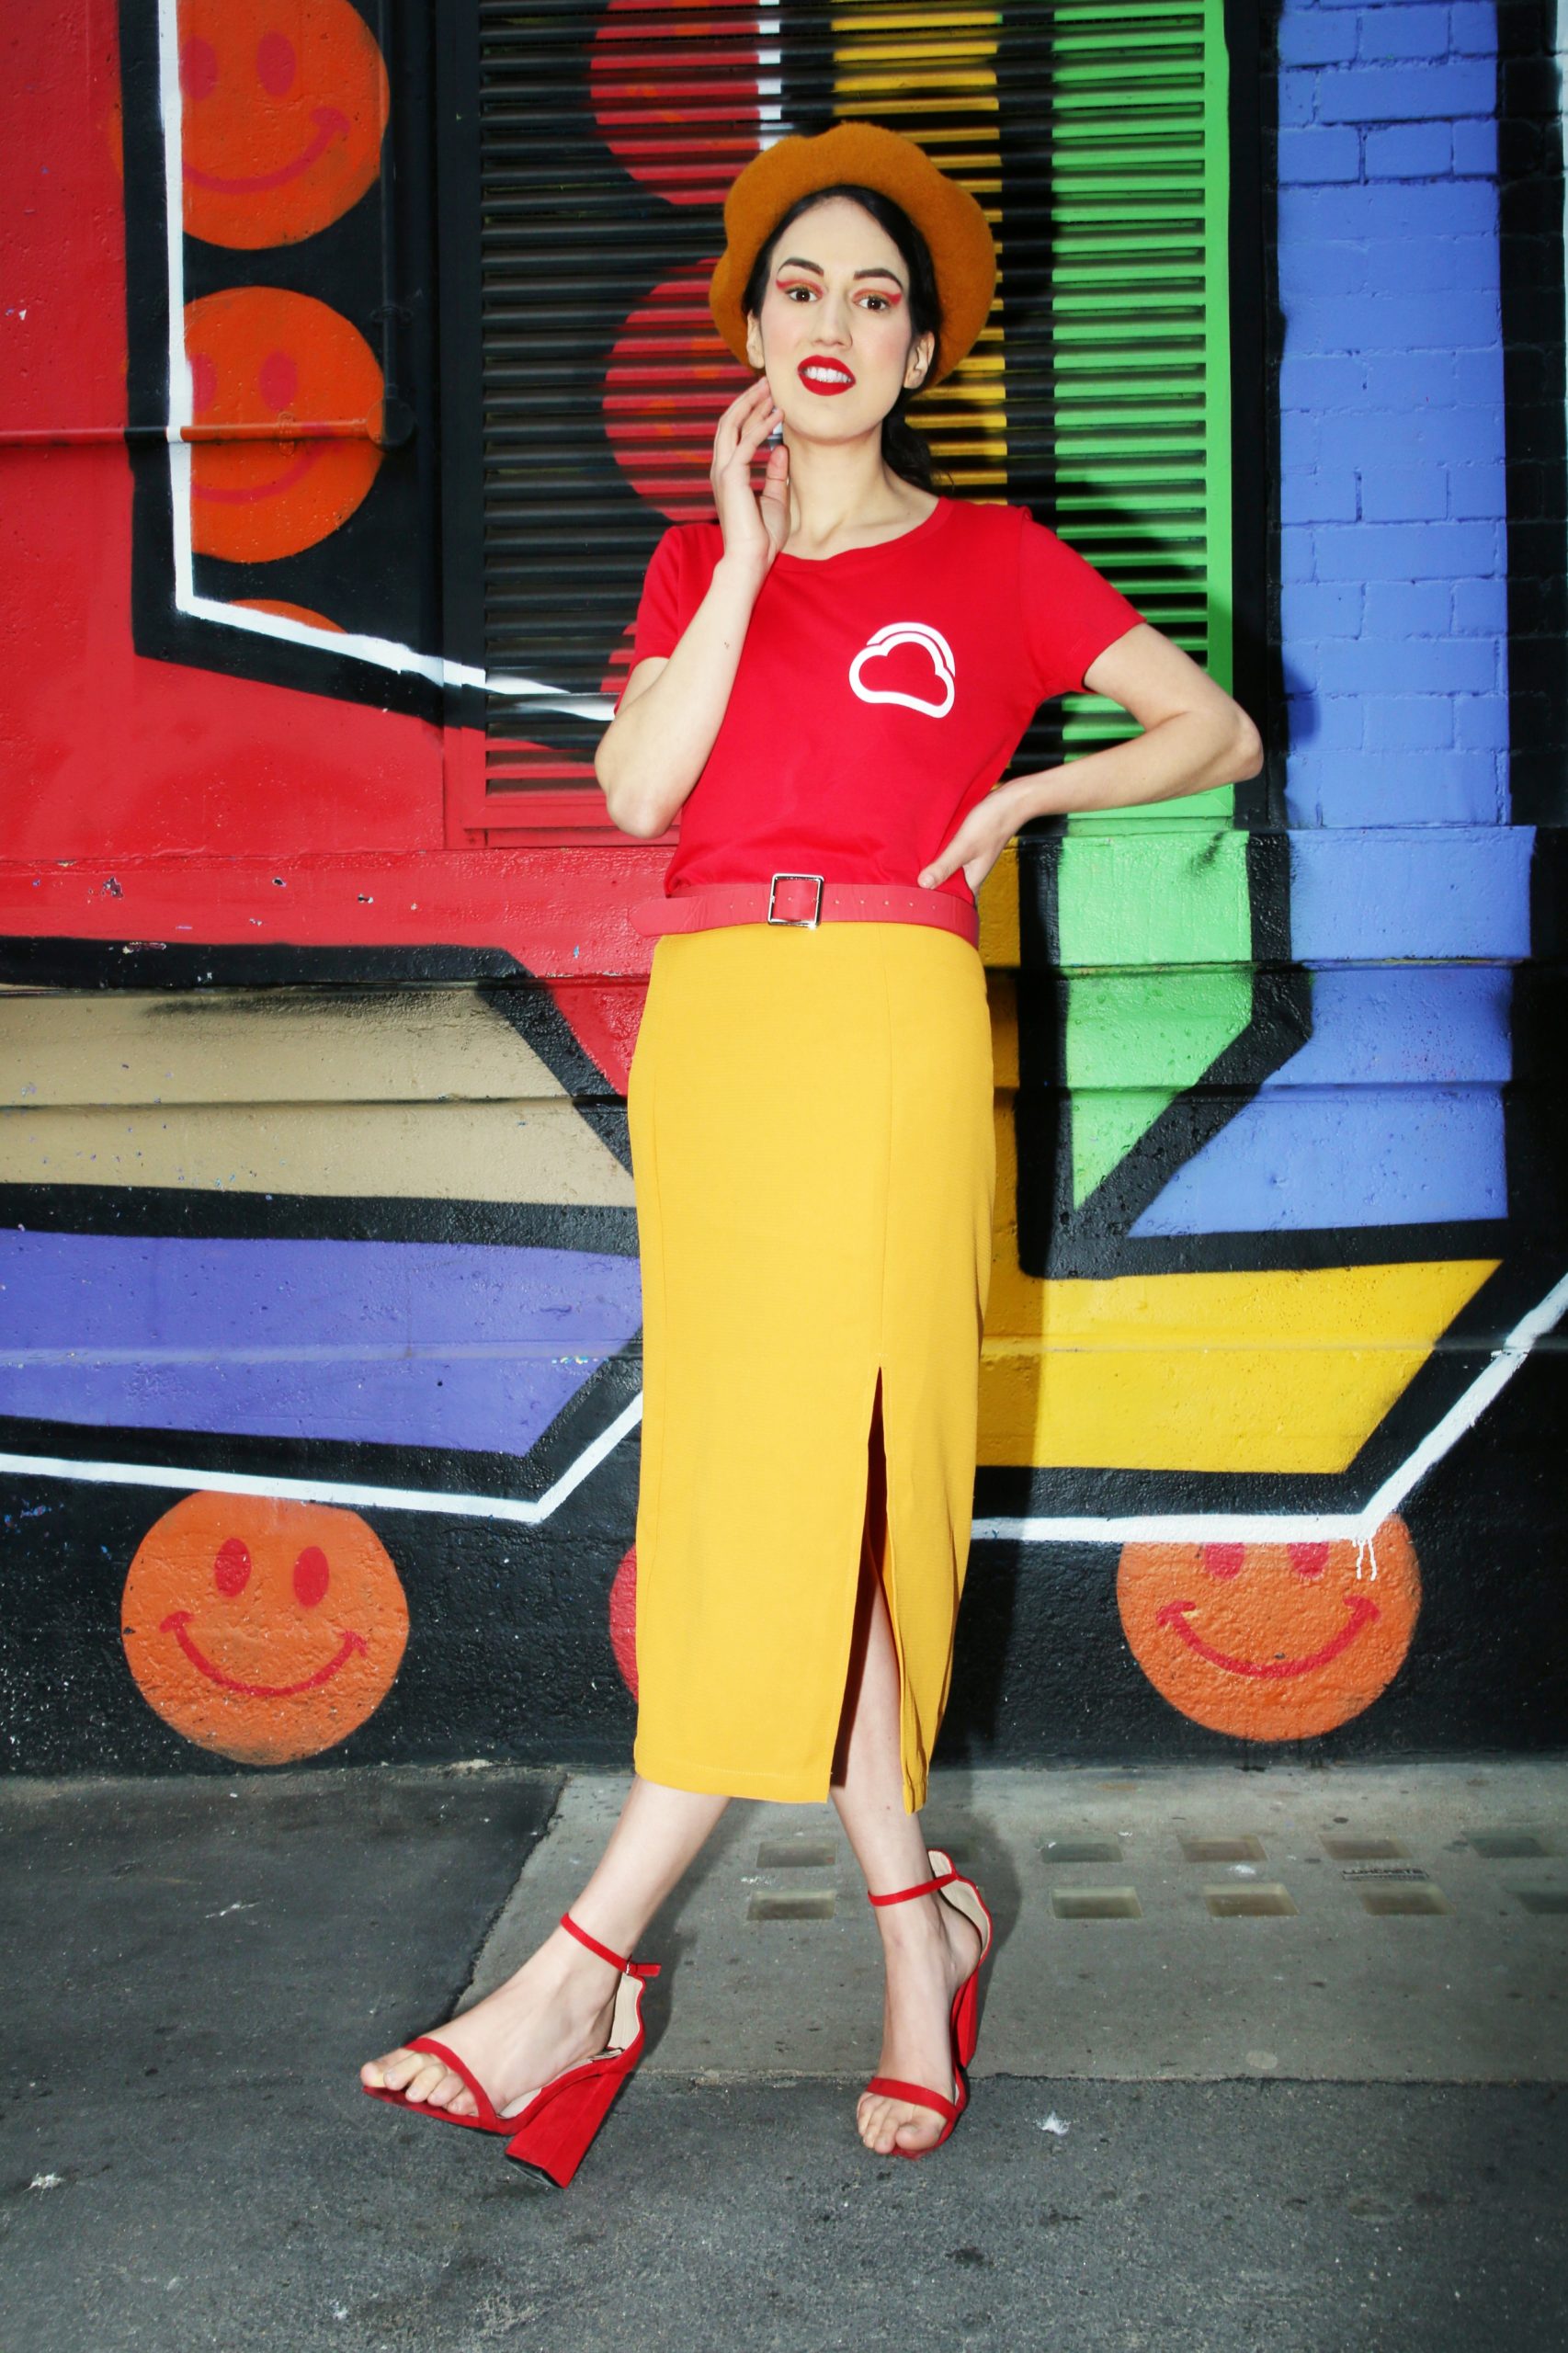 <img src="ana.jpg" alt="ana in yellow split skirt and red shoes"/> 